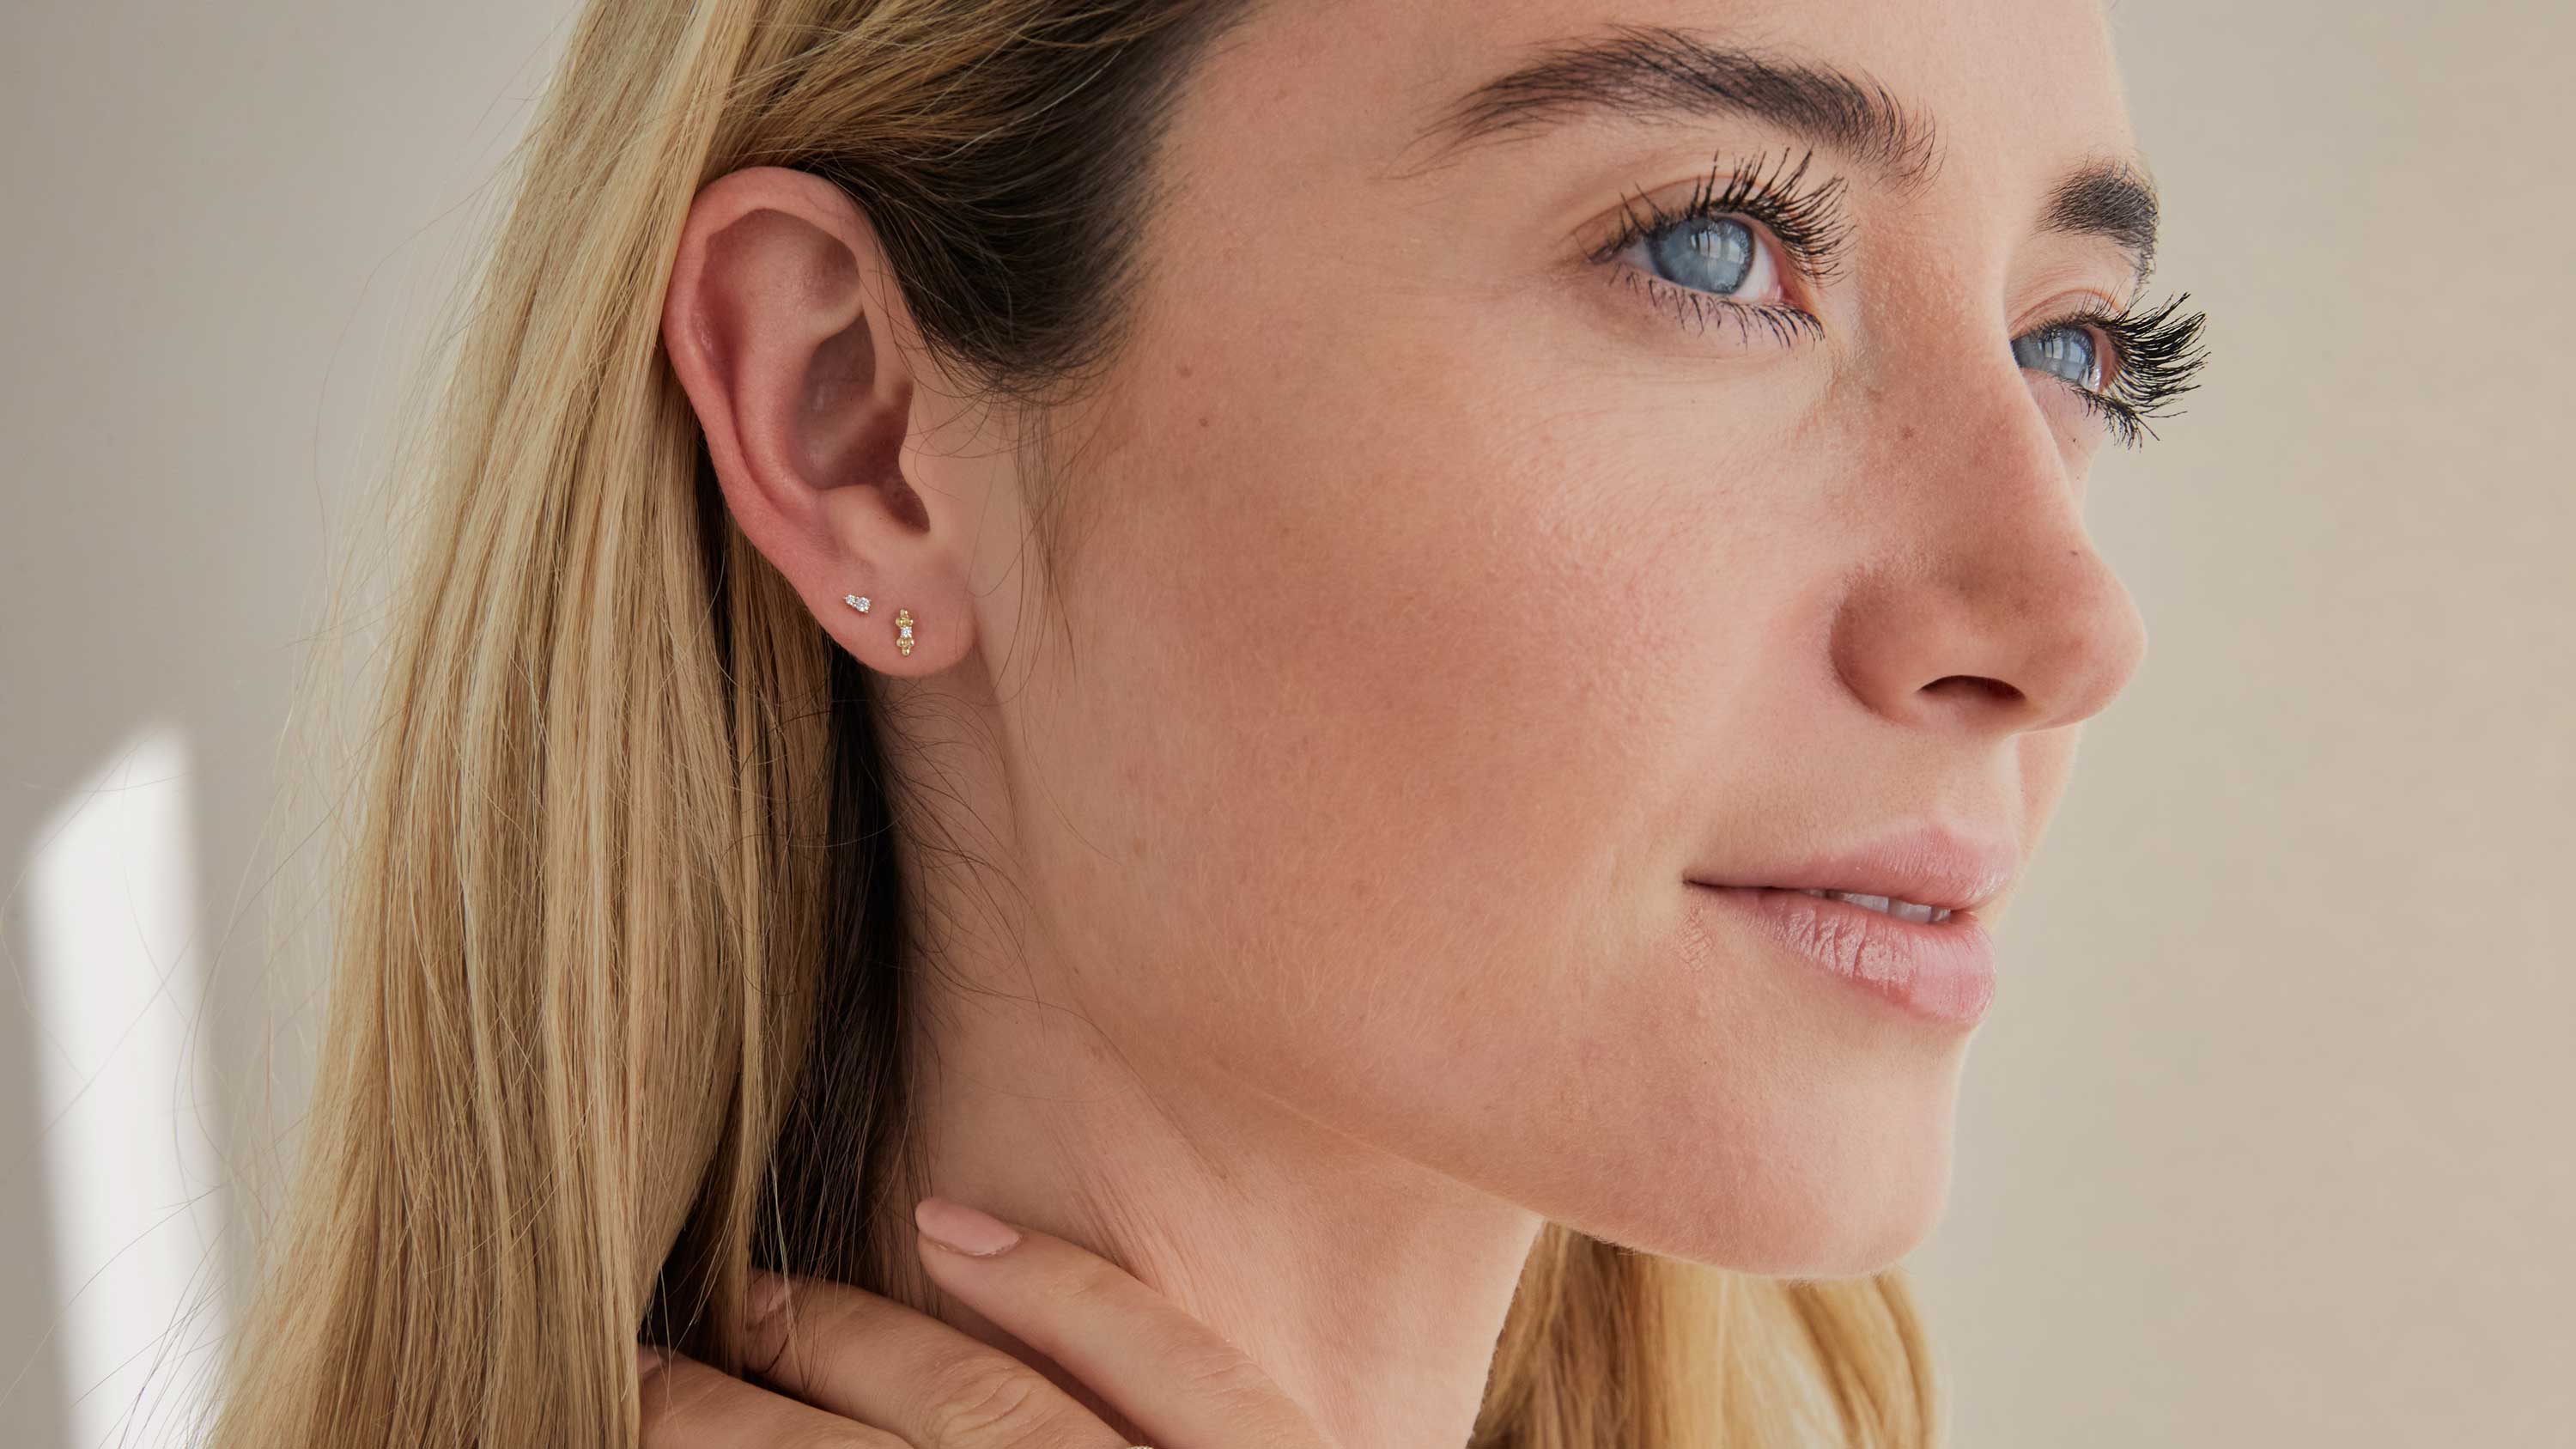 Getting Your Ears Pierced: What to Expect